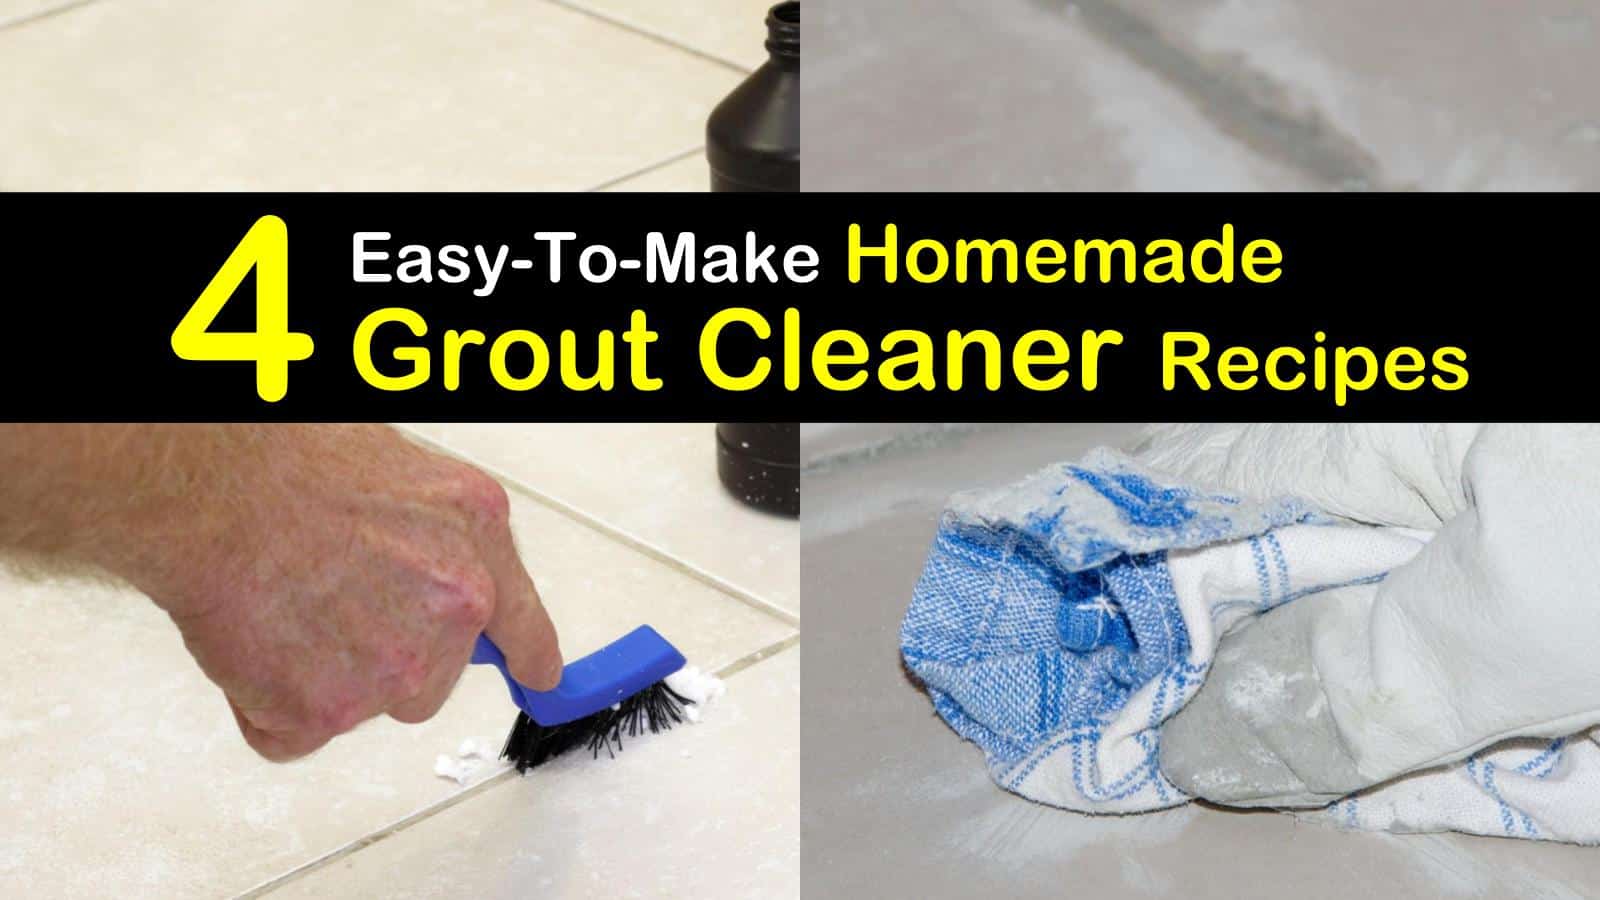 The Ultimate Guide to Cleaning Grout: 10 DIY Tile & Grout Cleaners Tested -  Bren Did